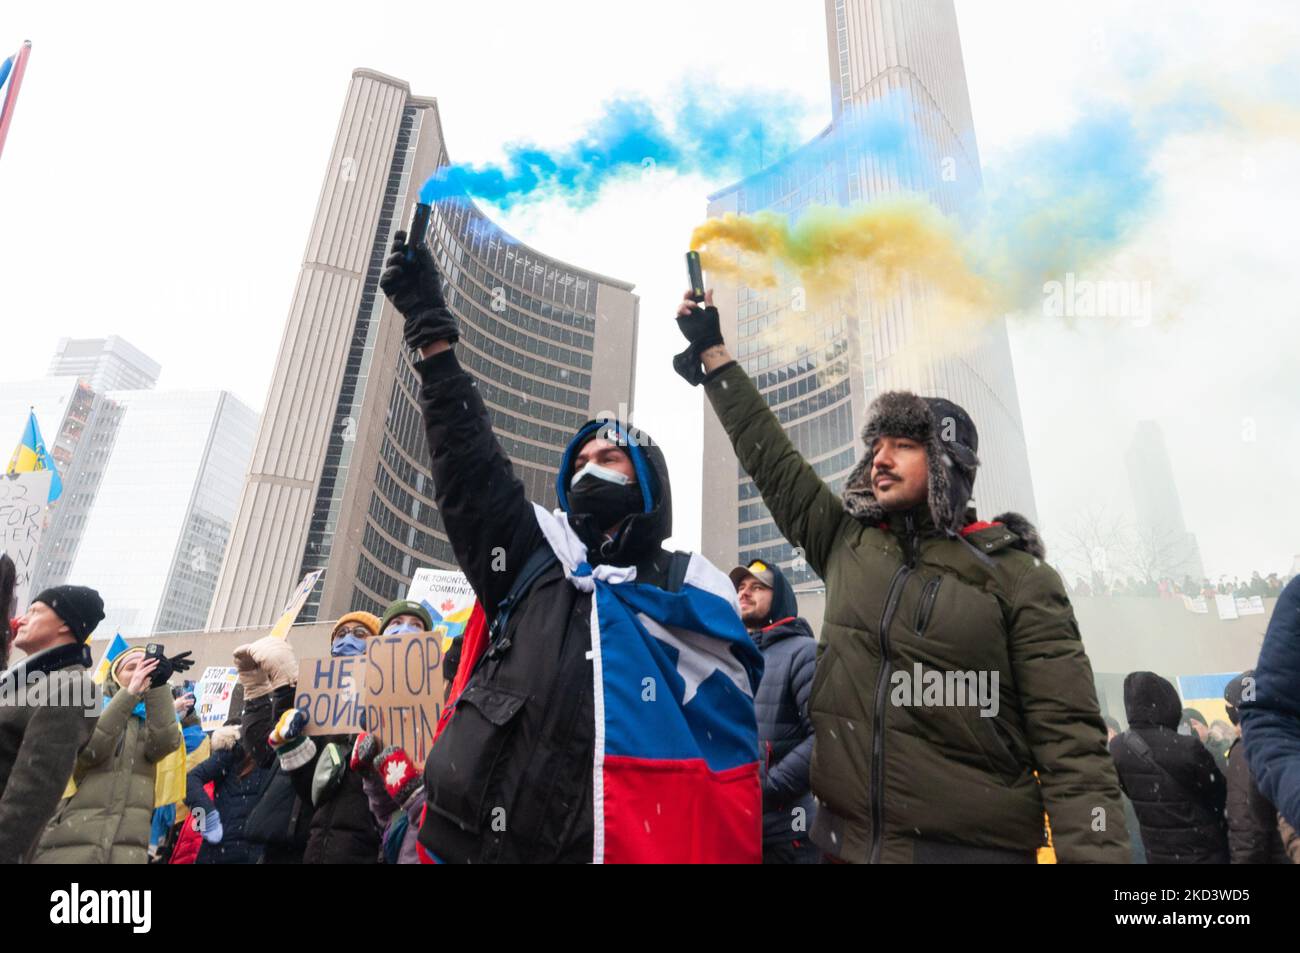 Demonstrators with yellow and blue Ukraine flags and anti-war signs in Downtown Nathan Phillips Square during a demonstration against Russian invasion in Ukraine. (Photo by Anatoliy Cherkasov/NurPhoto) Stock Photo